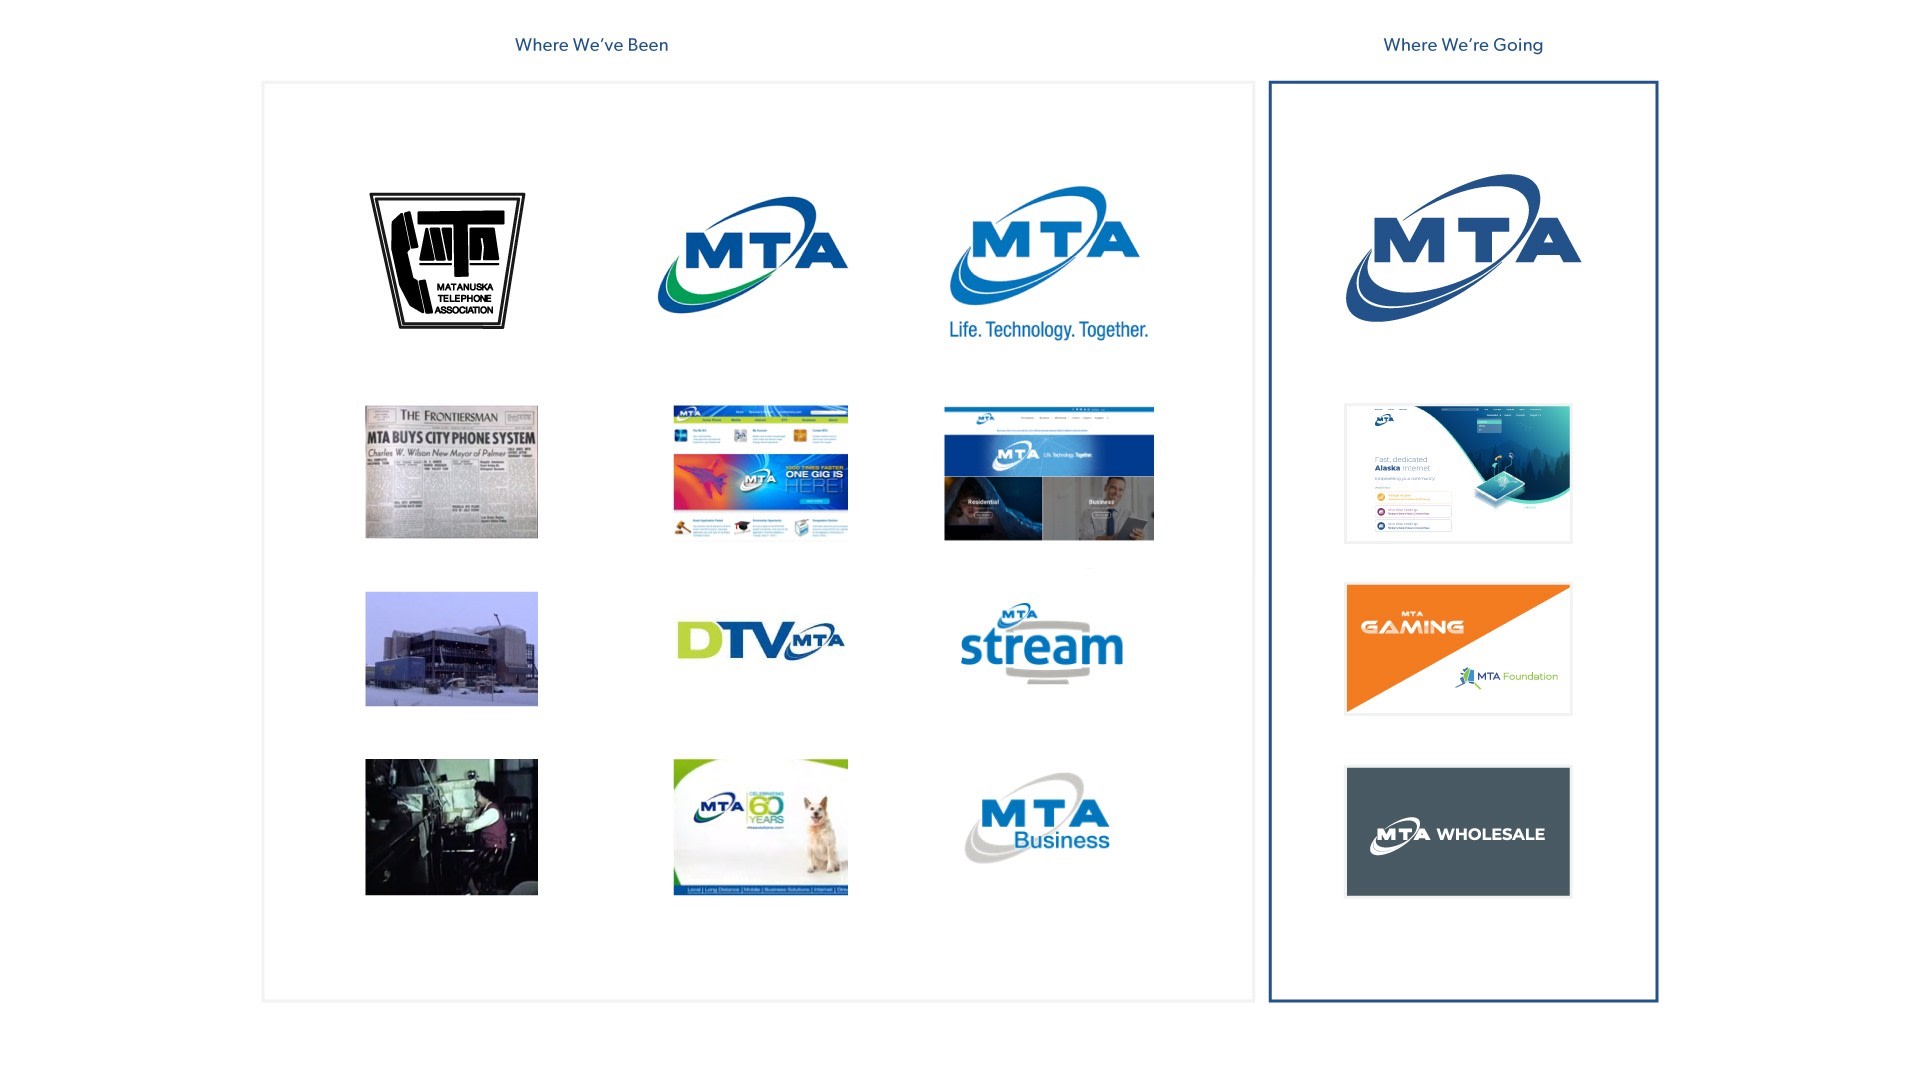 A New Look for MTA, Inspired by You